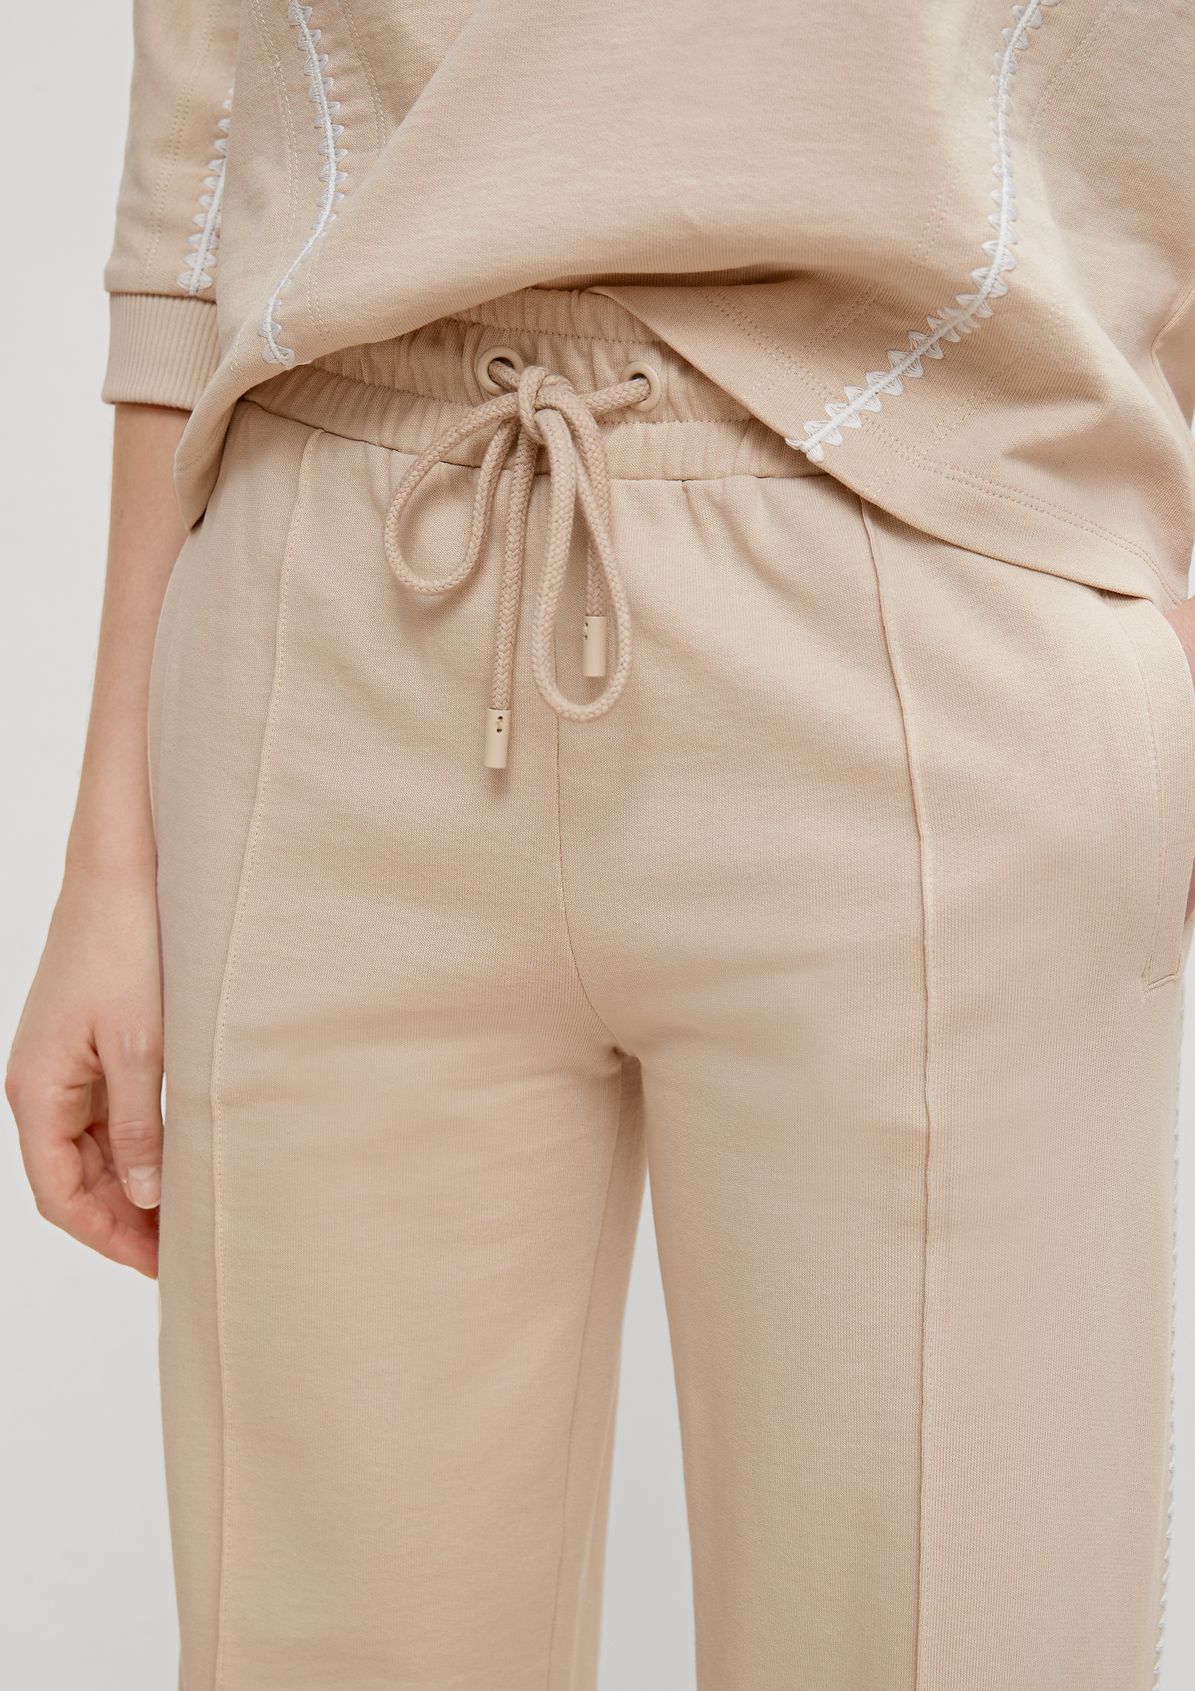 Relaxed: tracksuit bottoms with embroidery from comma